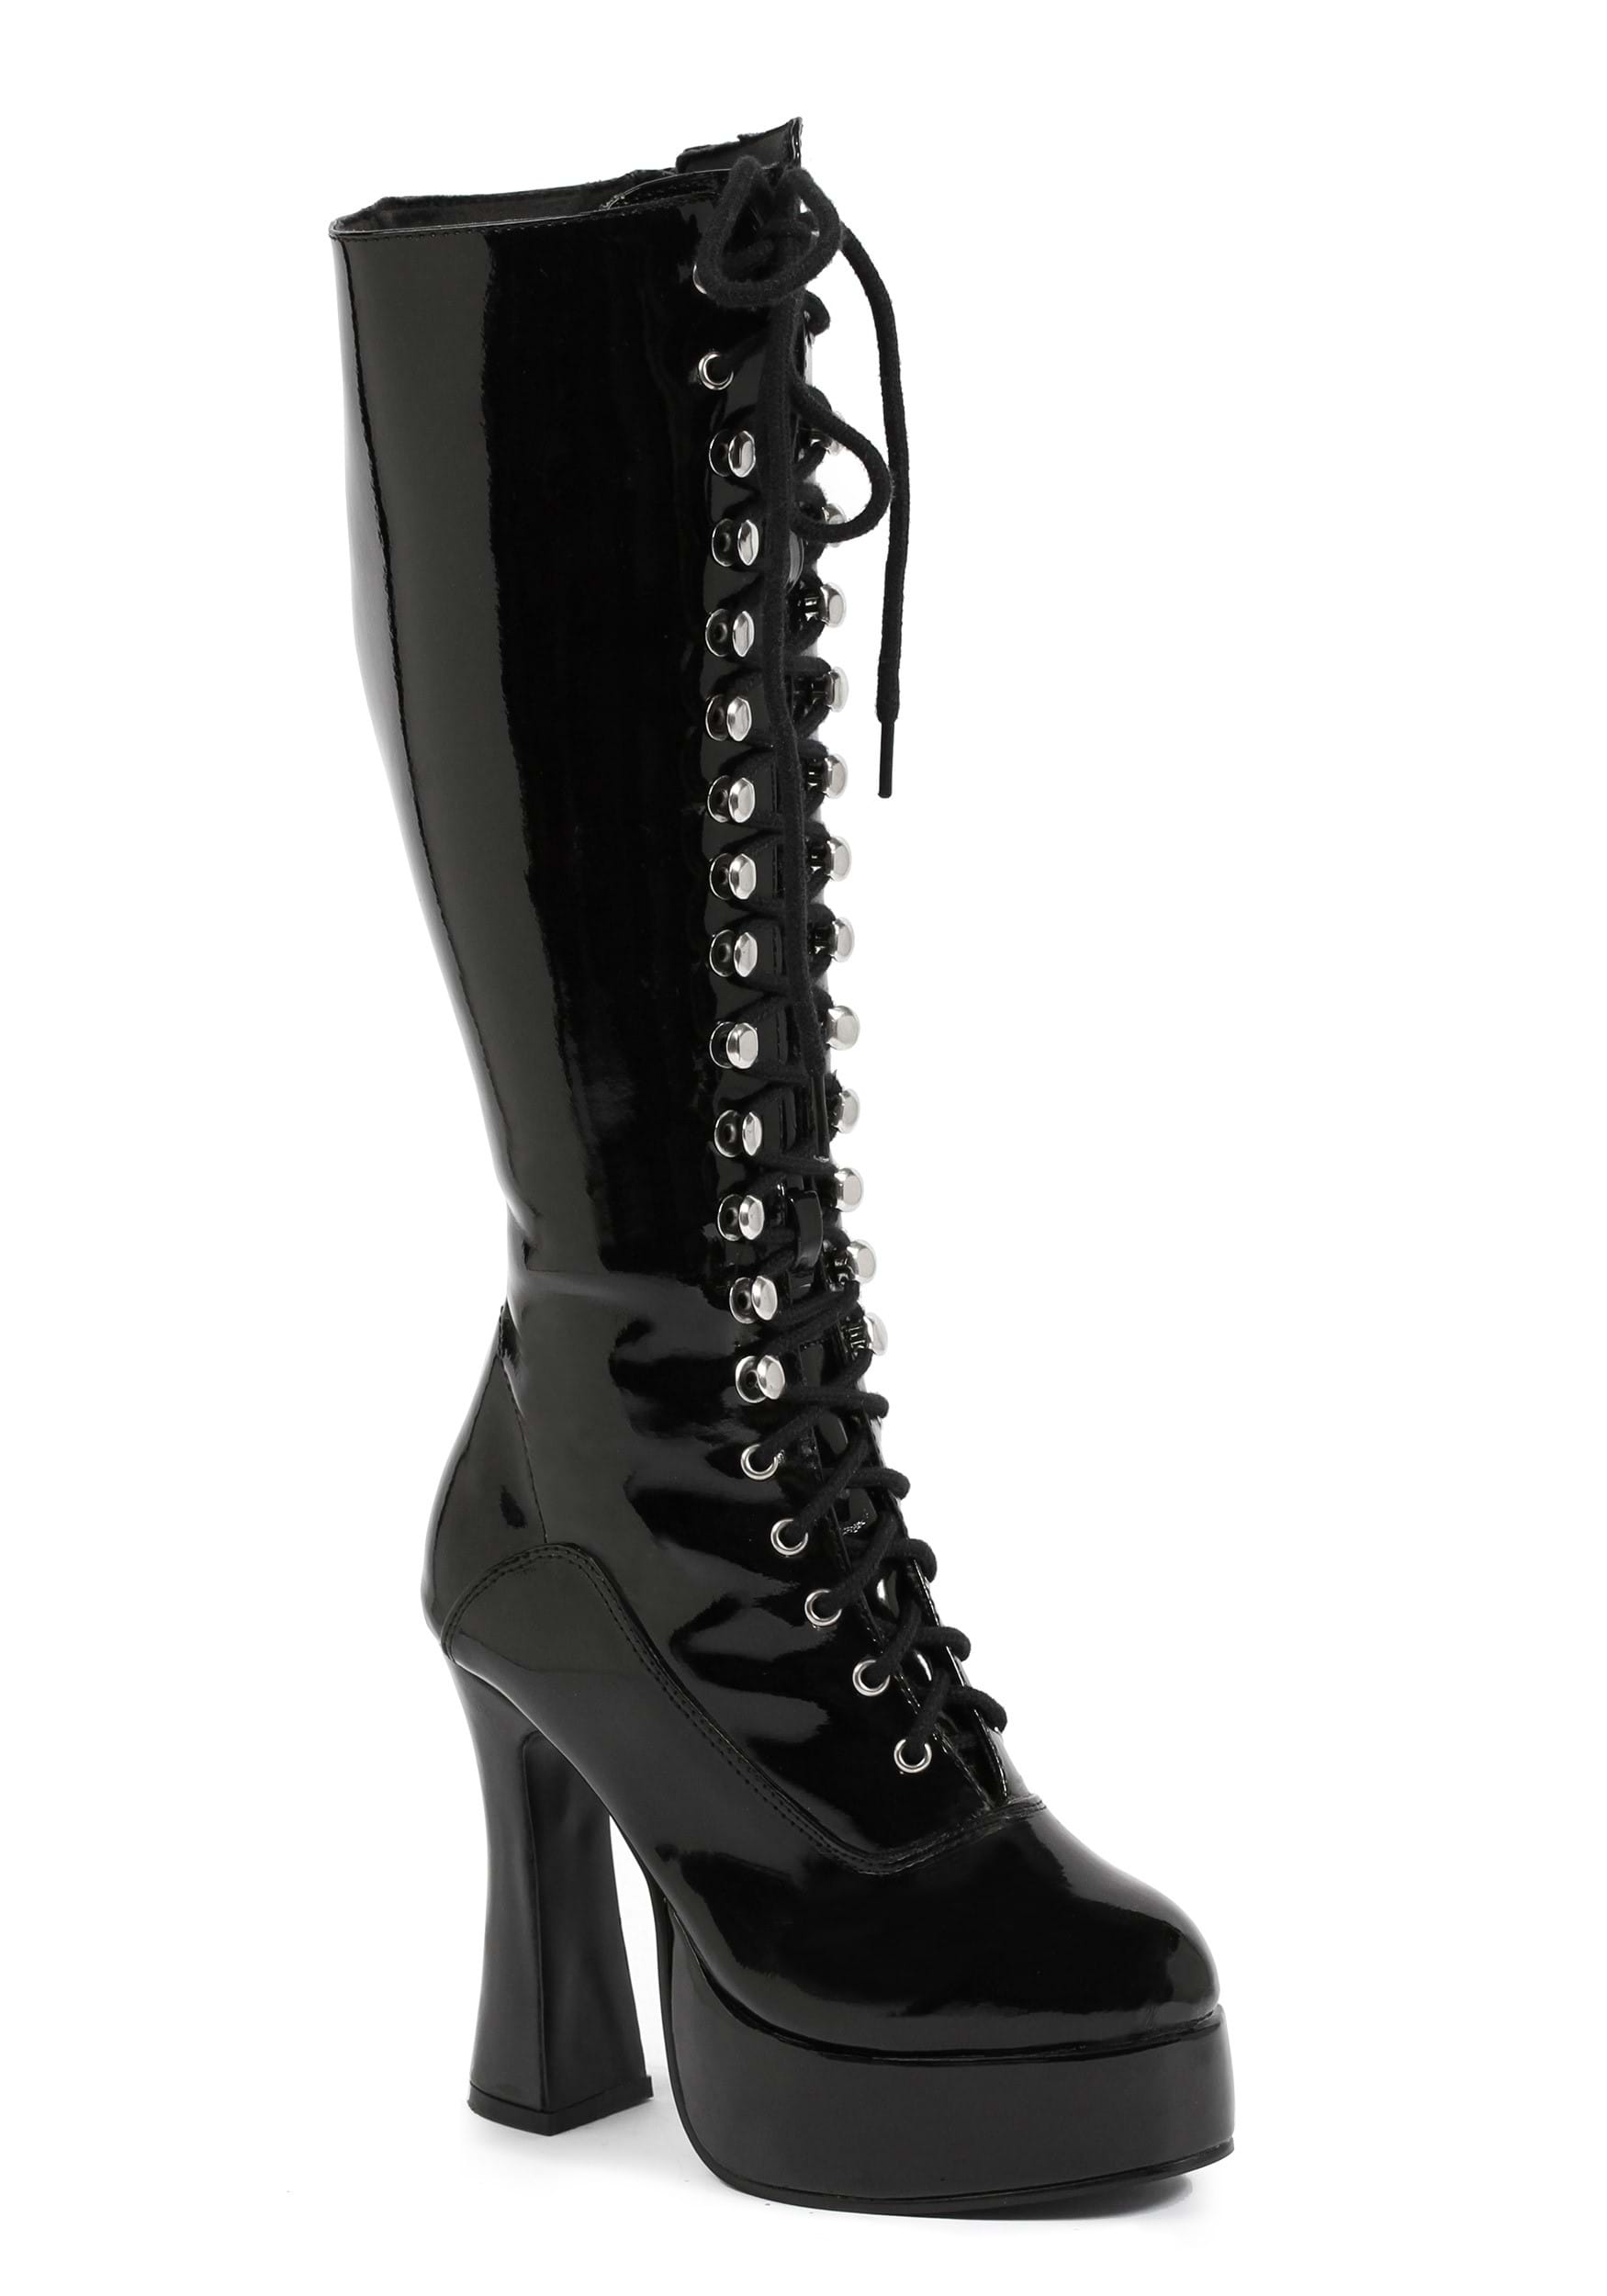 Image of Black Lace Knee High Women's Boots ID EEEASY-7